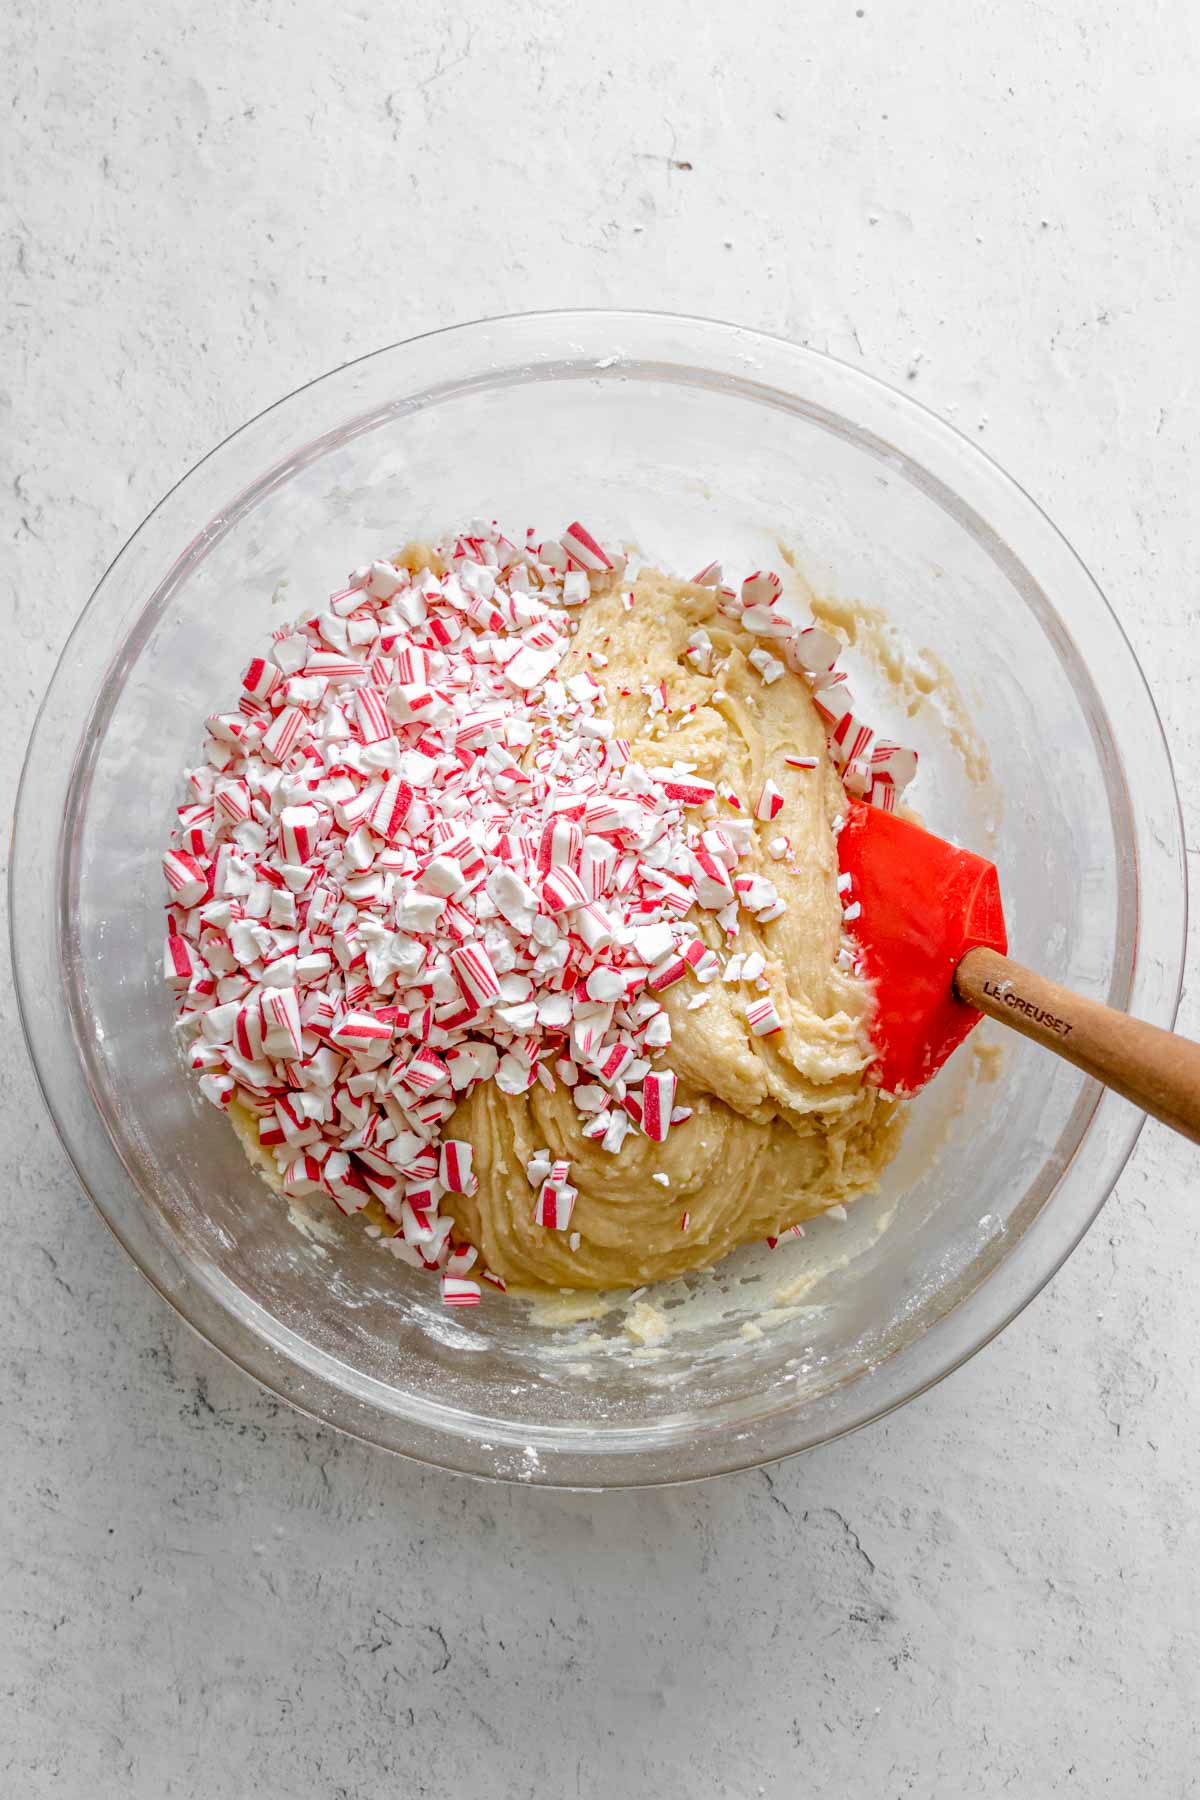 Peppermint Dipped Biscotti dough with candy being mixed in